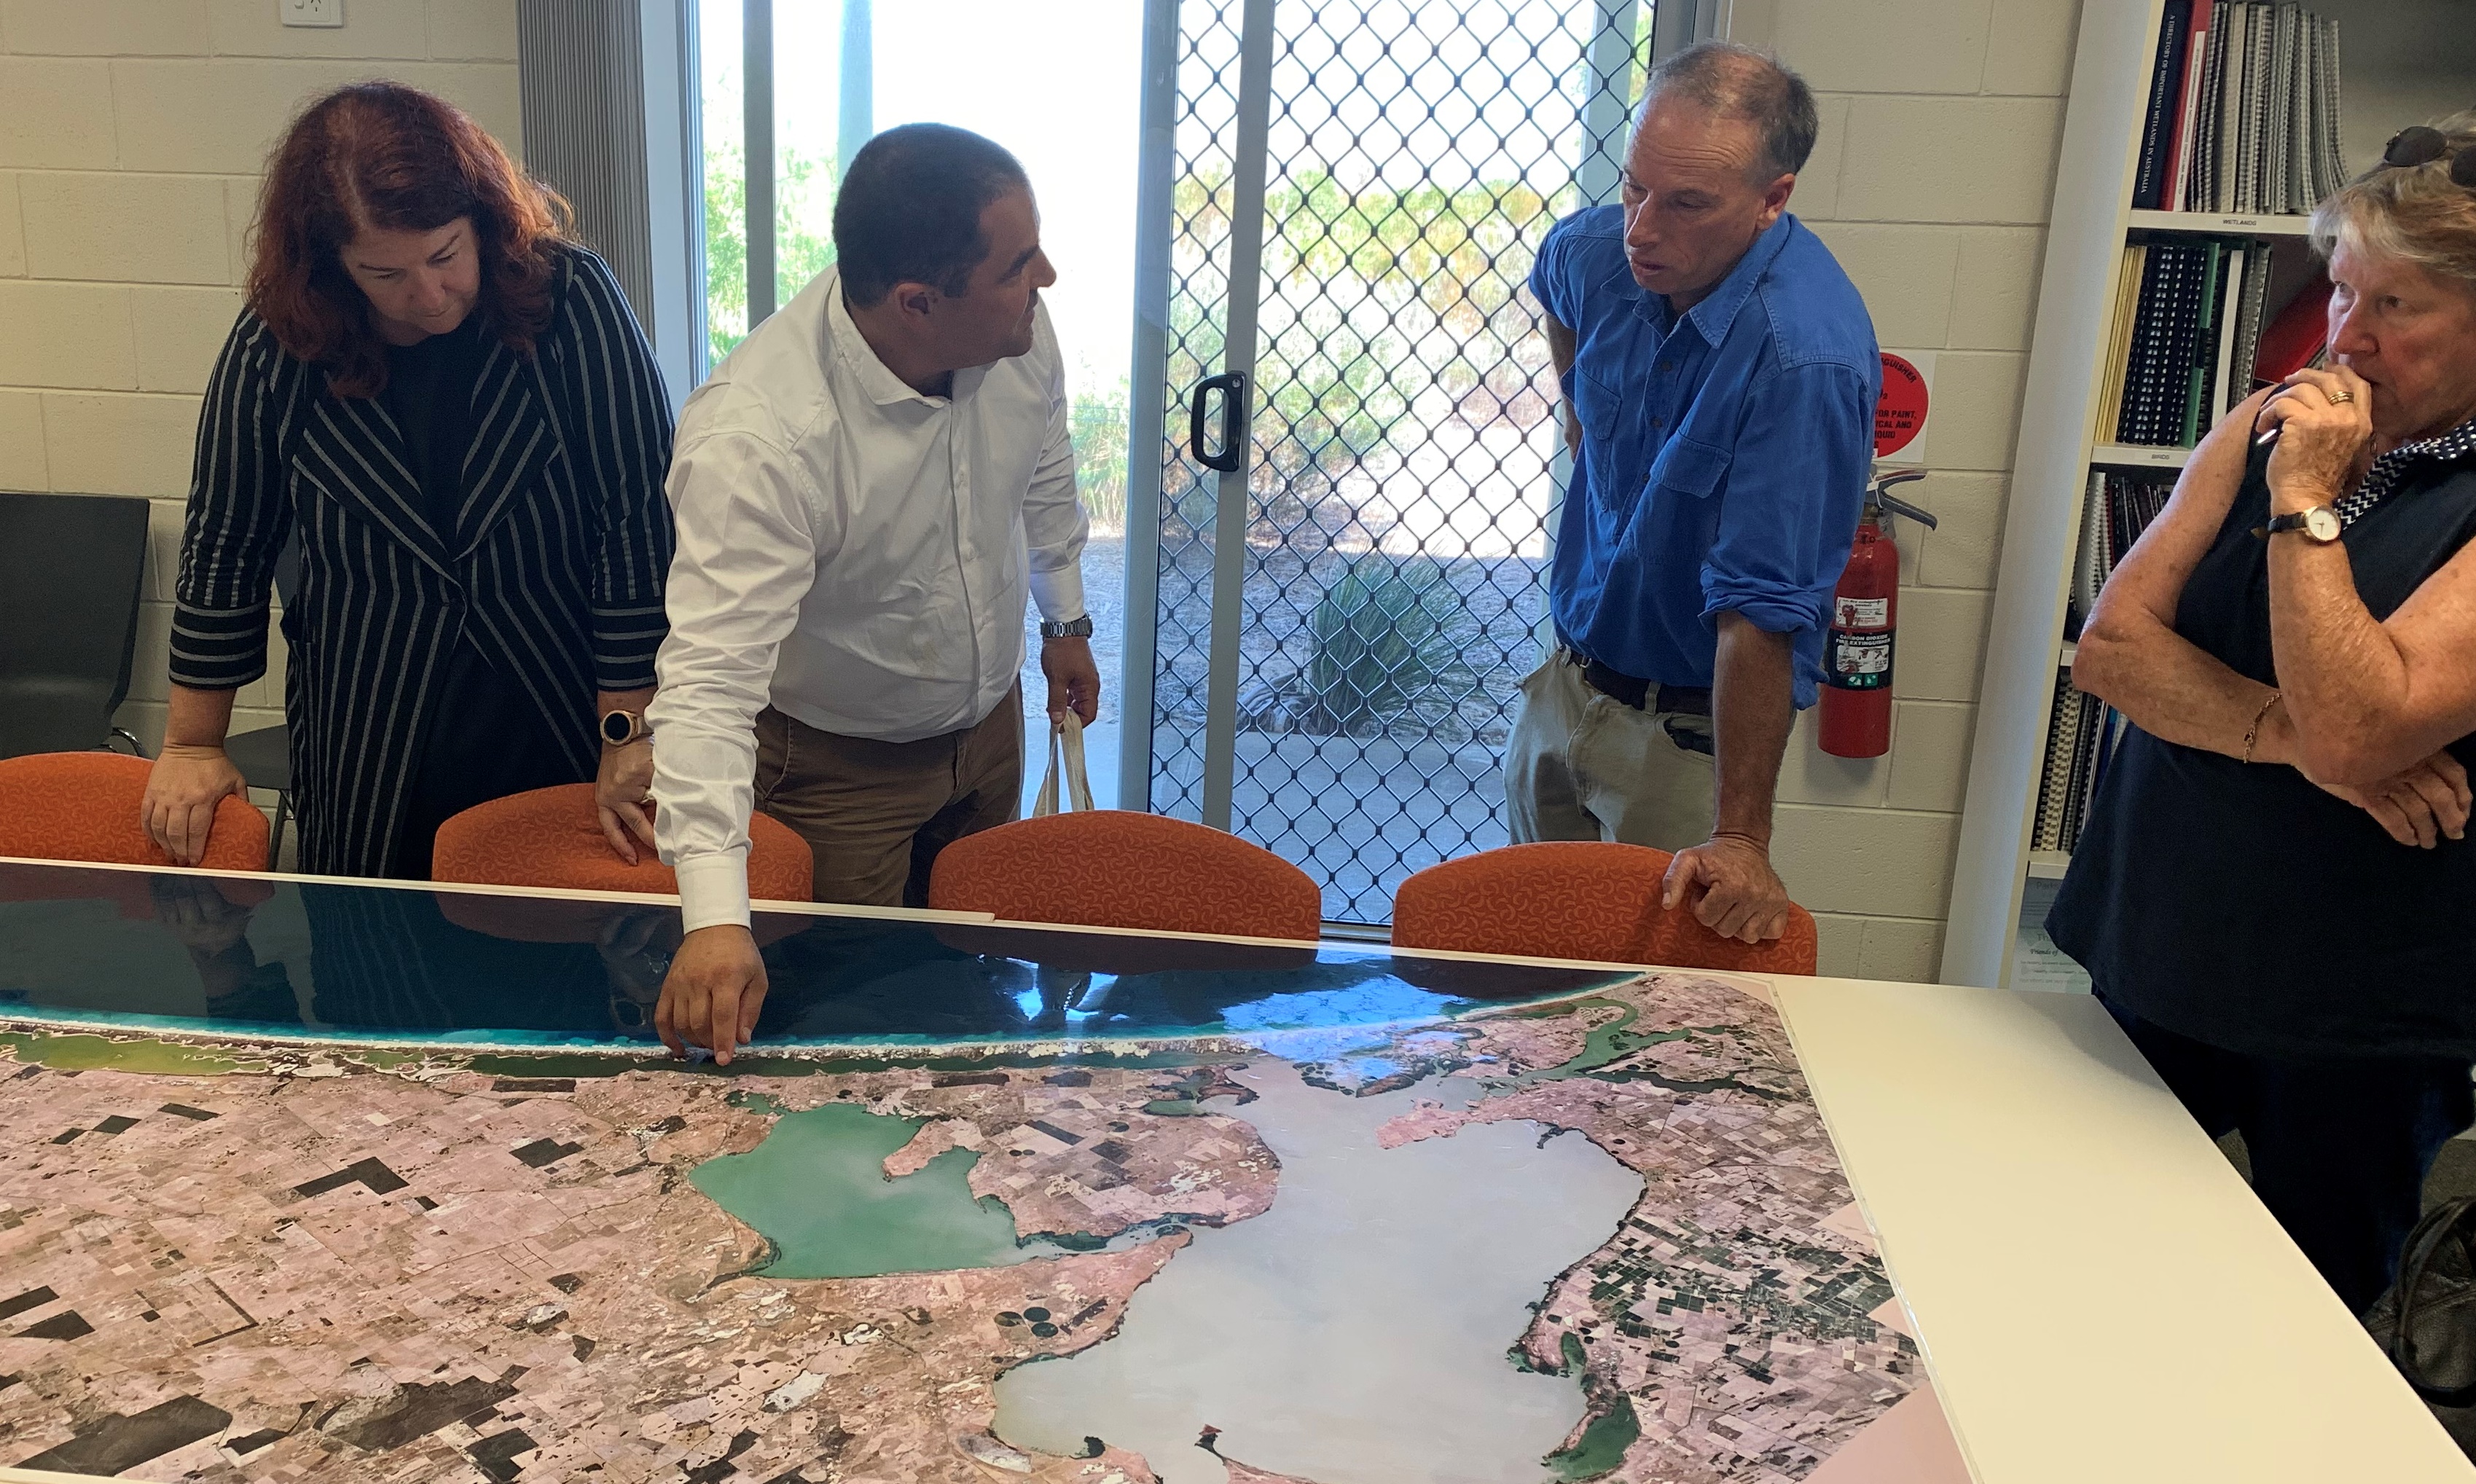 PASIN WELCOMES FEDERAL ENVIRONMENT MINISTER TO THE COORONG